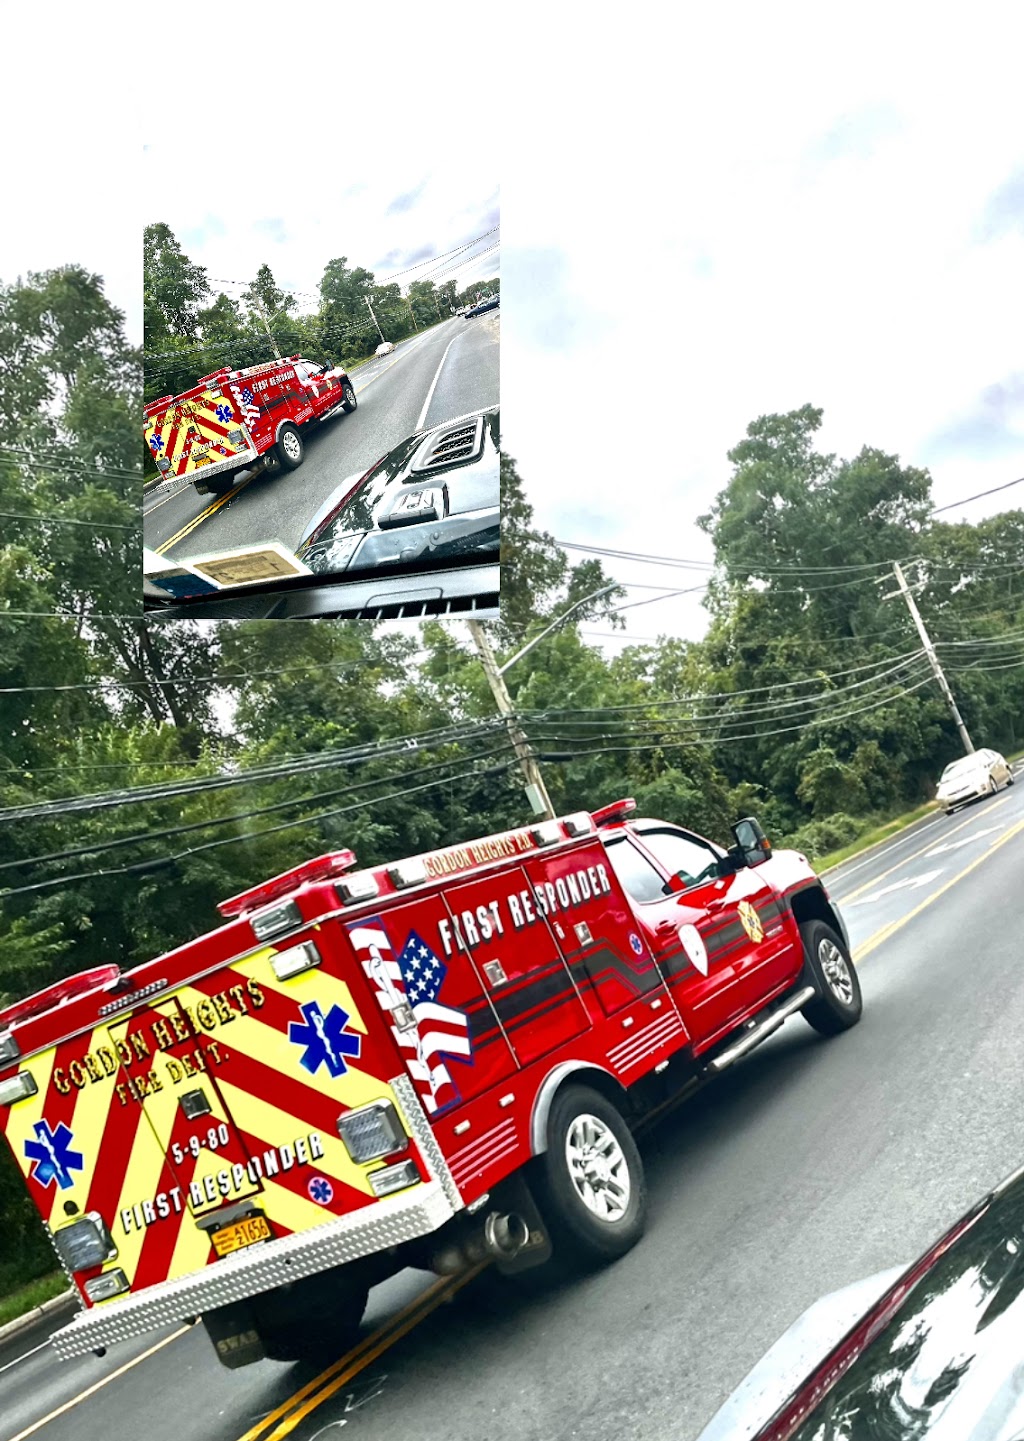 Gordon Heights Fire District | 23 Hawkins Ave, Medford, NY 11763 | Phone: (631) 698-6303